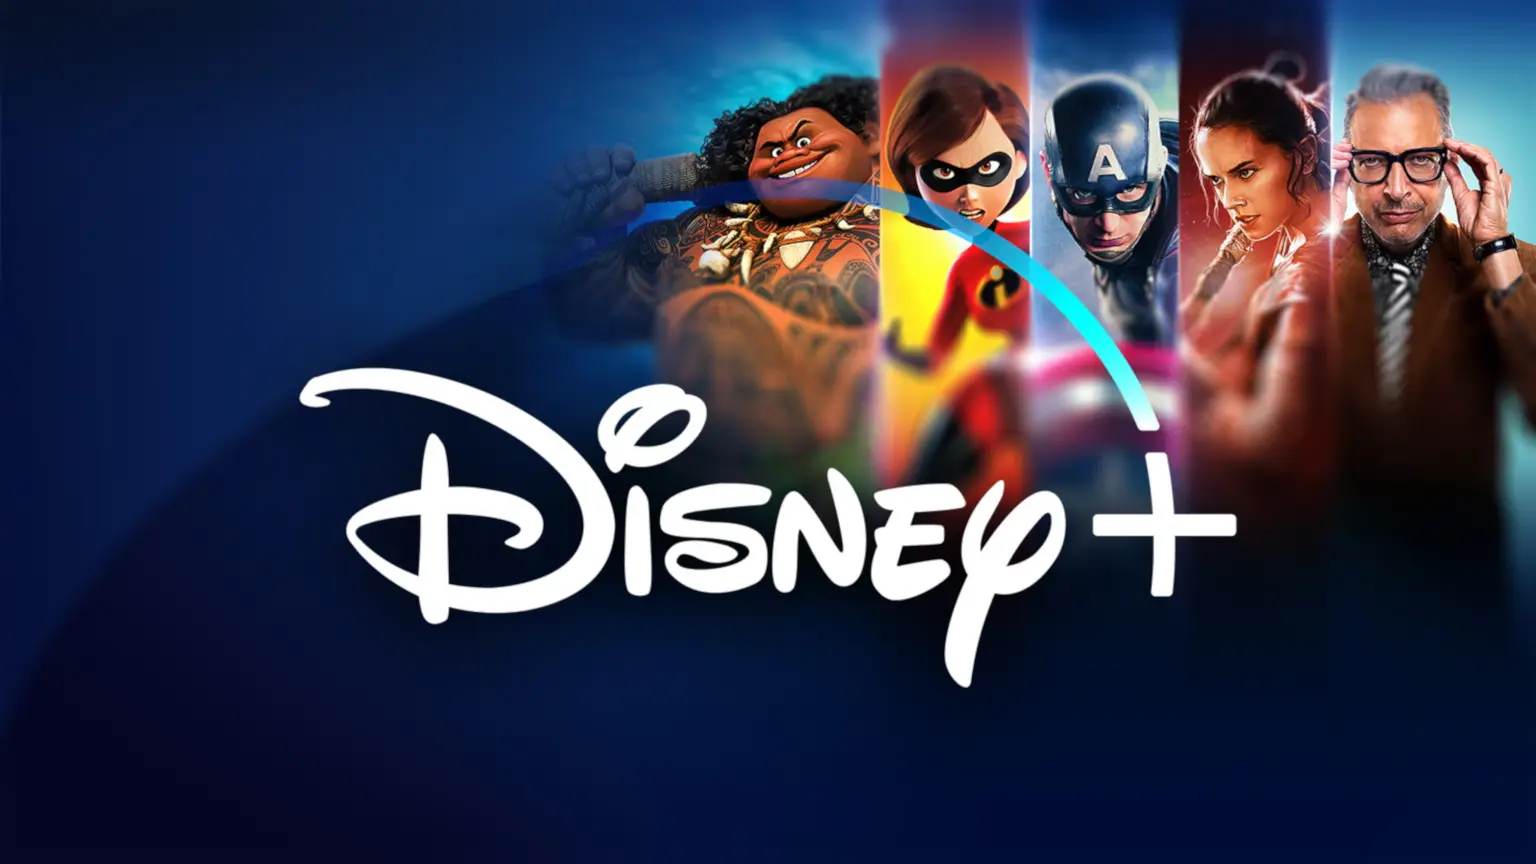 Full list of Disney+ Movies and TV Shows May 2020 | finder.com